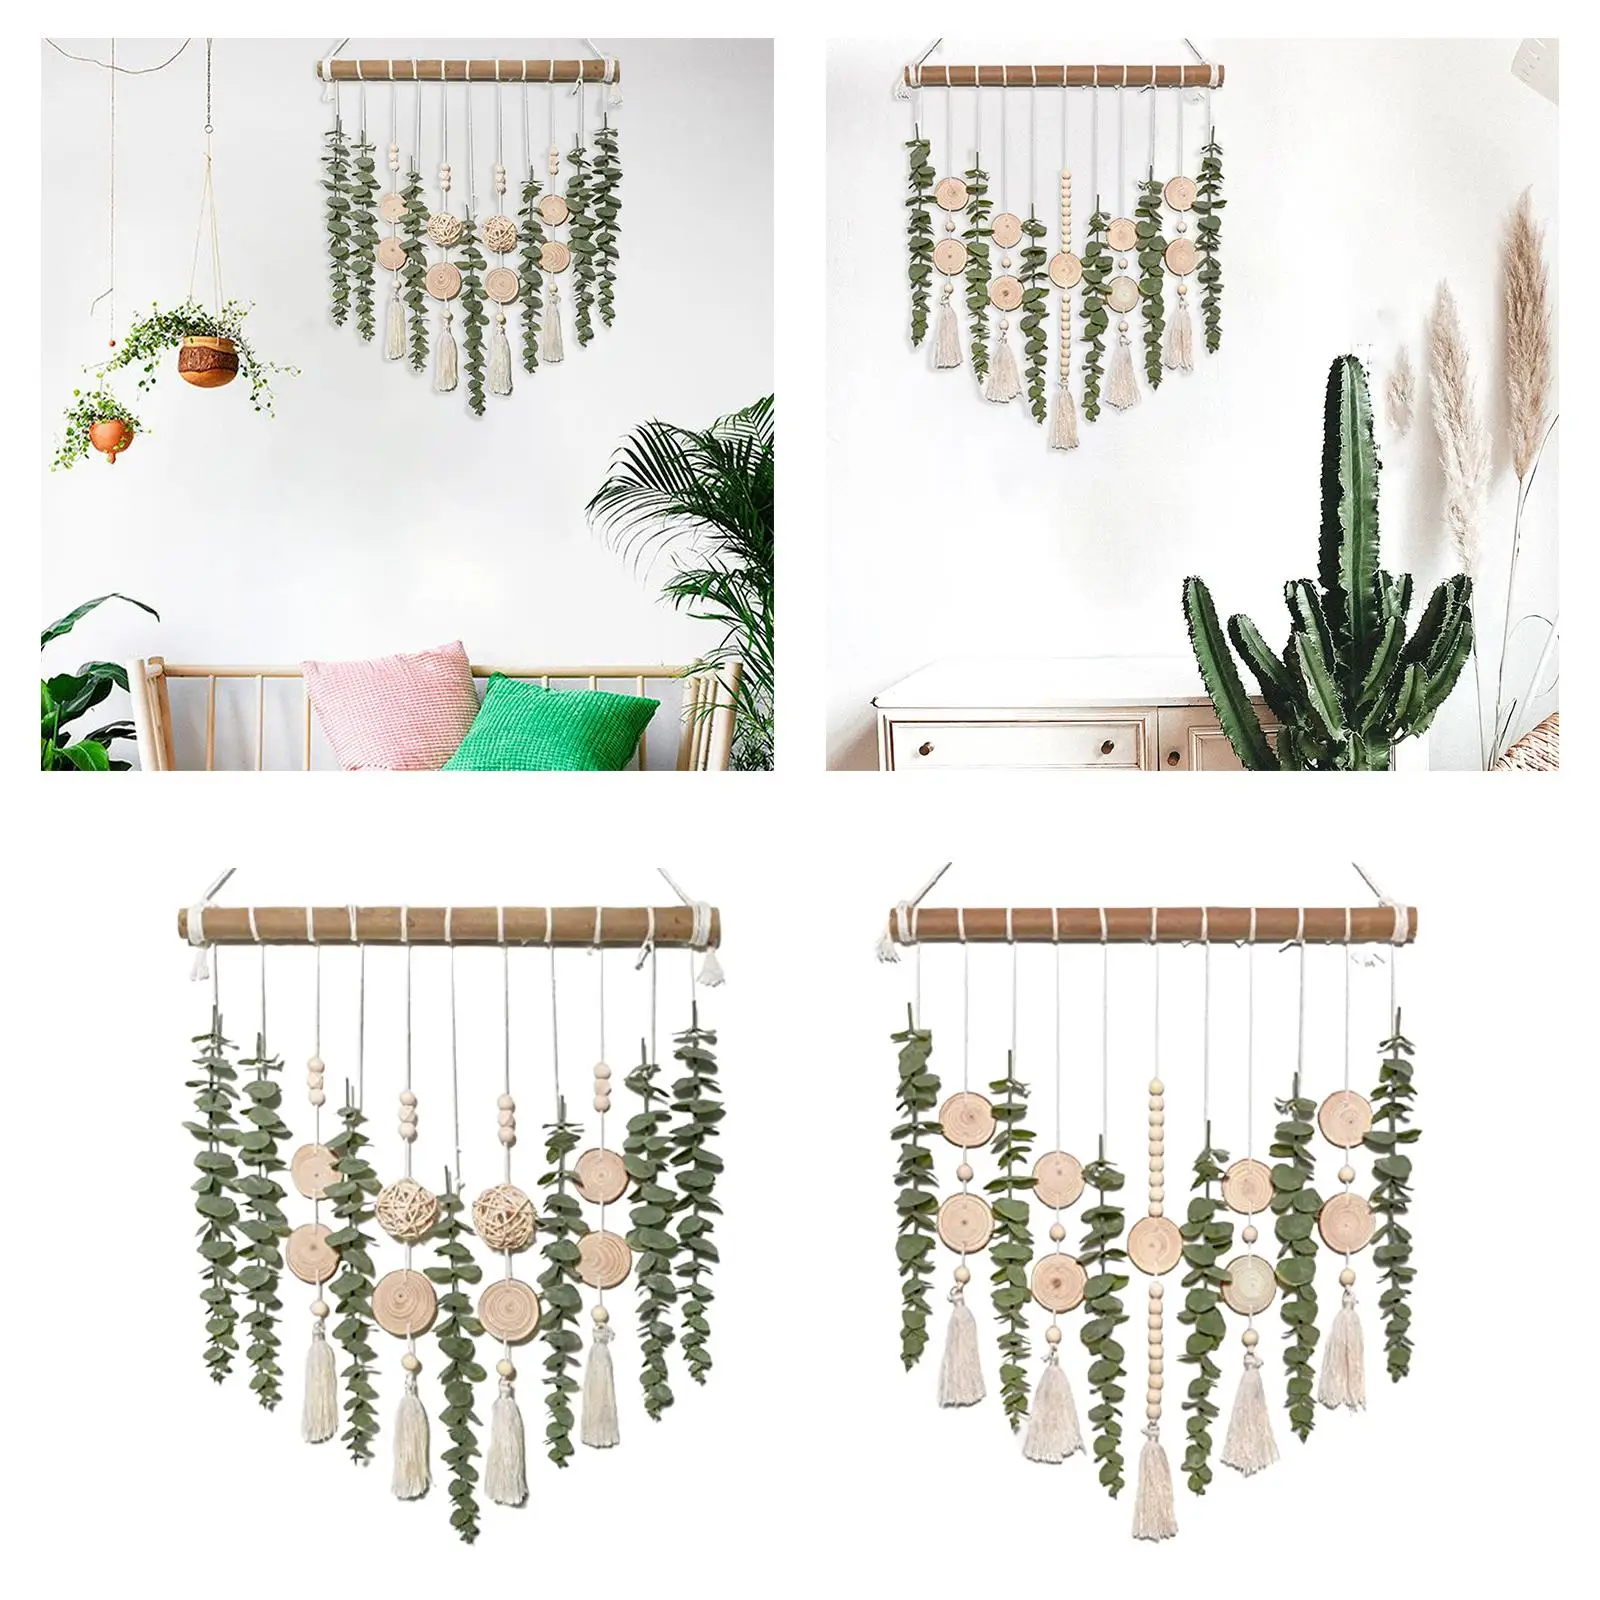 Artificial Eucalyptus Wall Hanging Decor Bohemian Macrame Wall Hanging Tapestry for Office Bathroom Kitchen Apartment Nursery